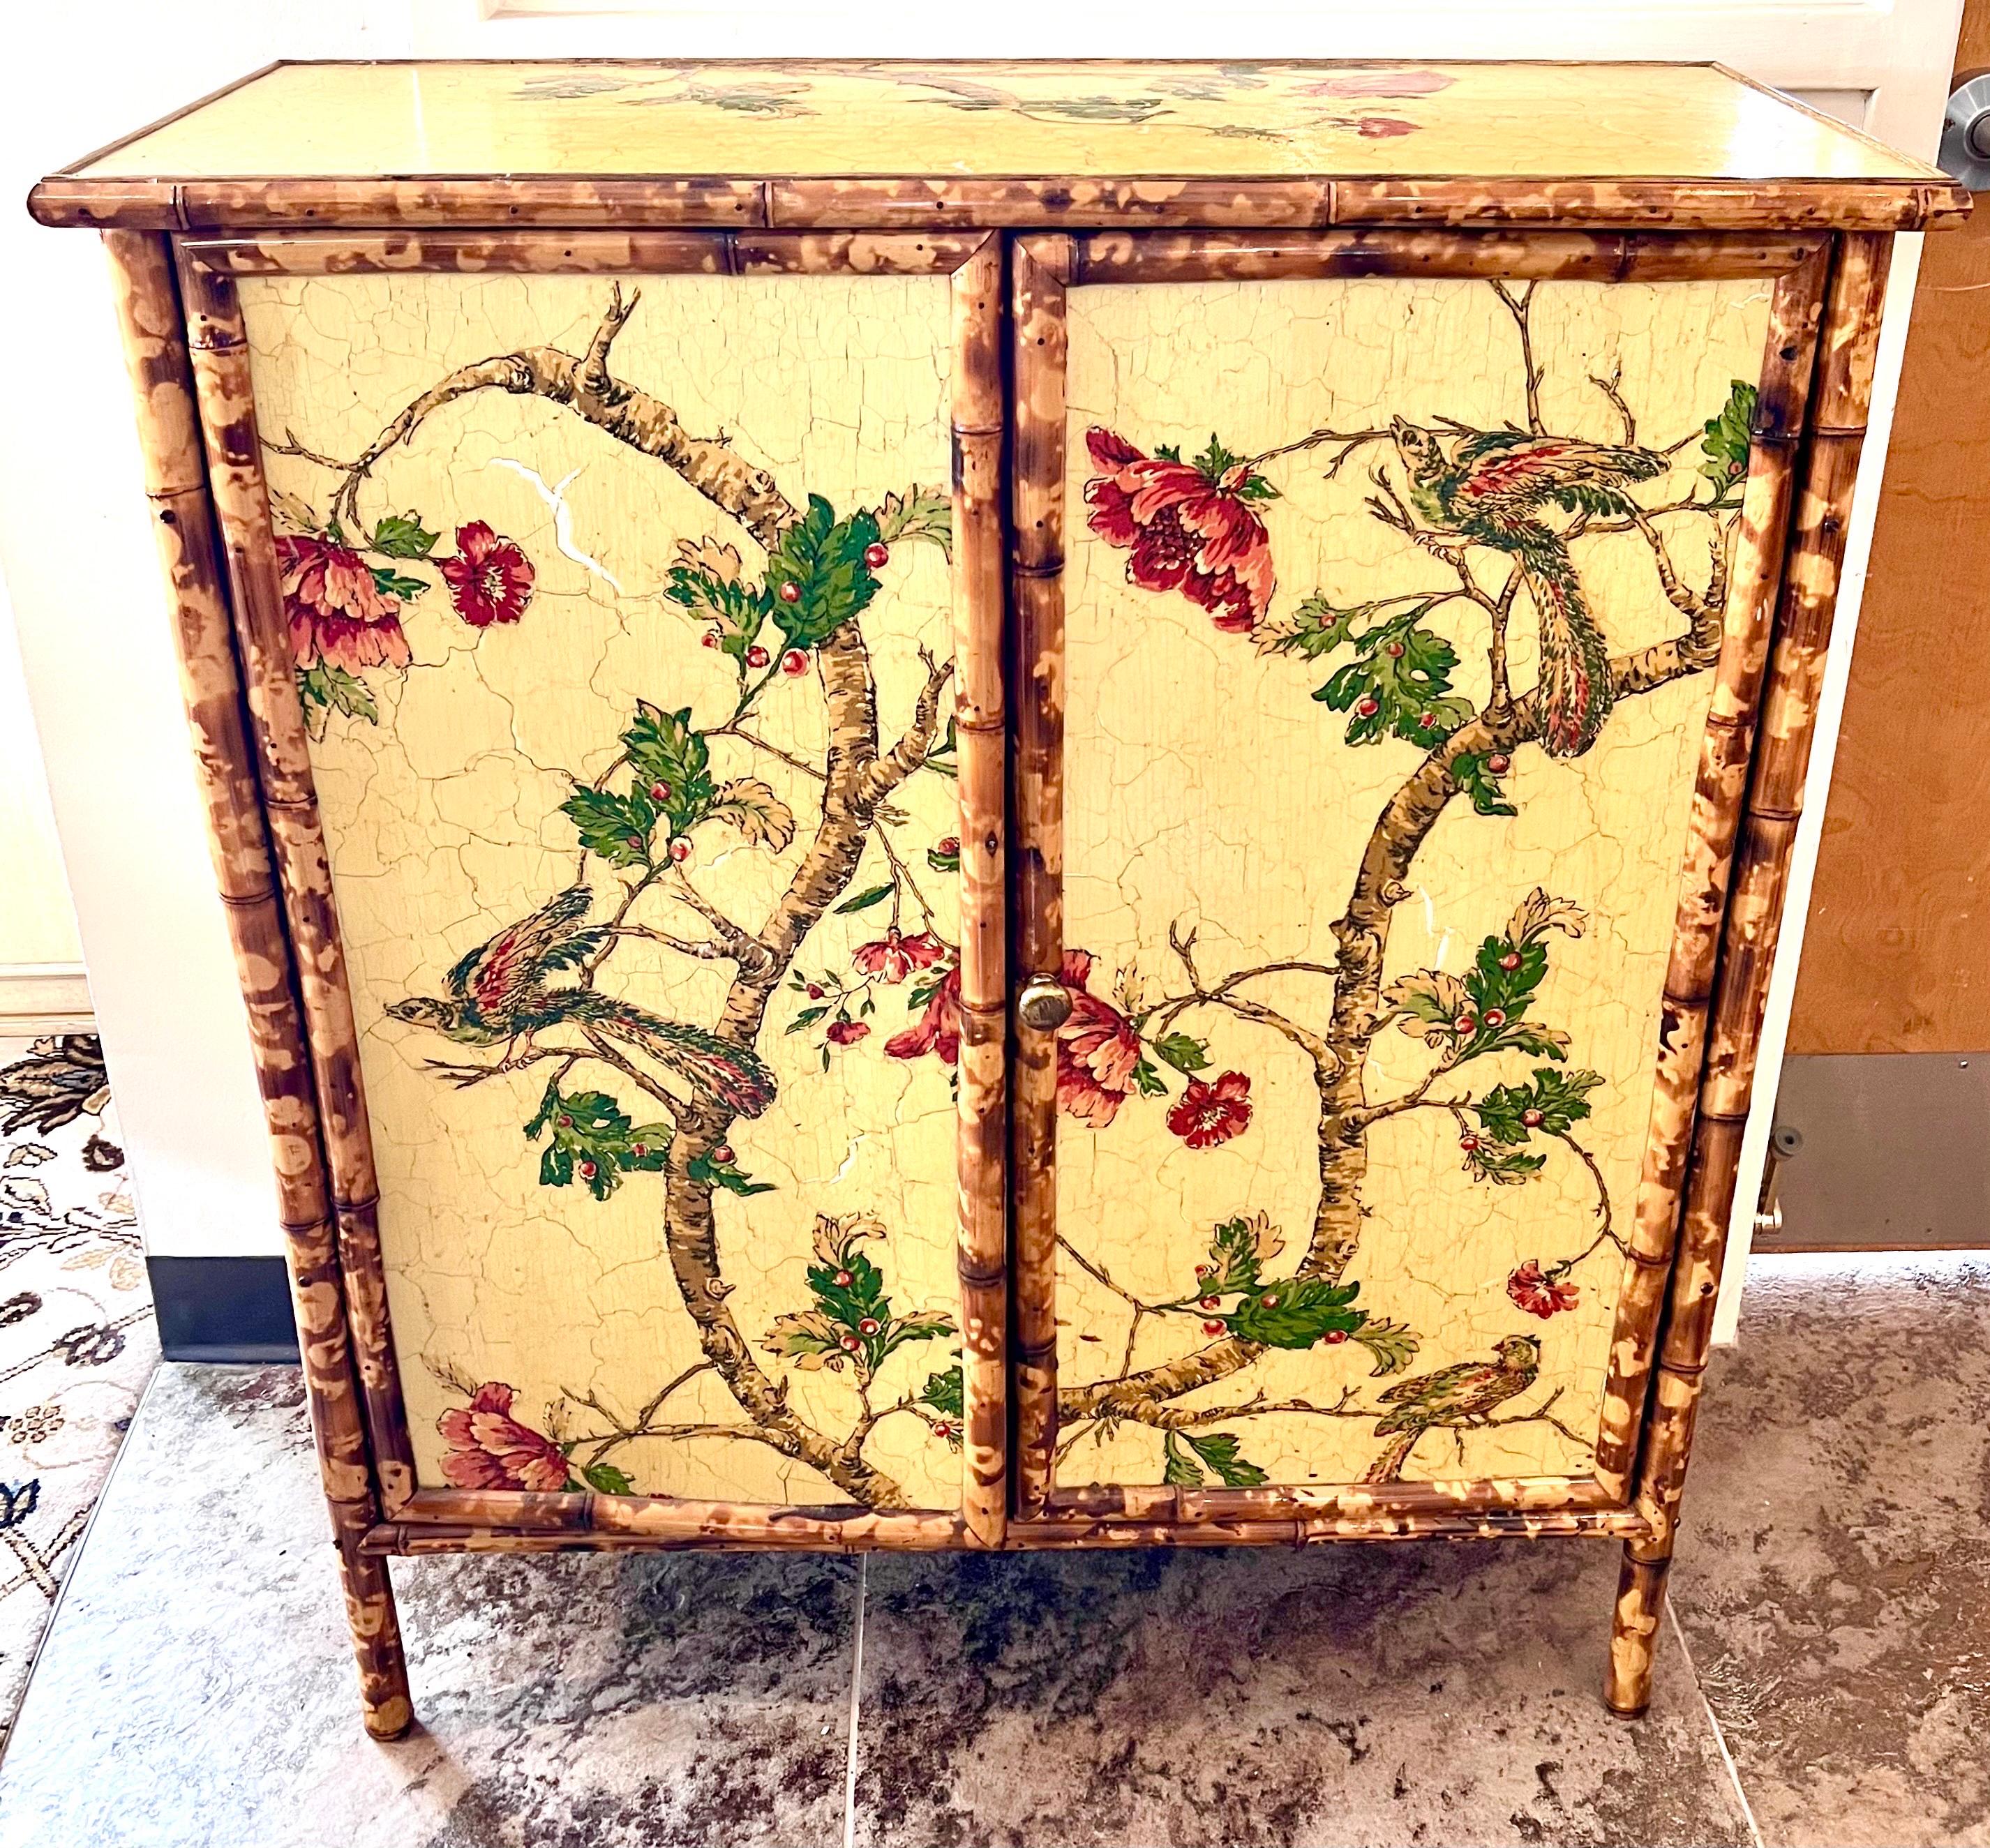 Unique one of a kind chinoiserie style pale yellow cabinet features a floral decoupage design all over with a crackled finish and is accented with faux bamboo trim with a tortoiseshell finish. Two doors open to shelves.  We are based on east coast